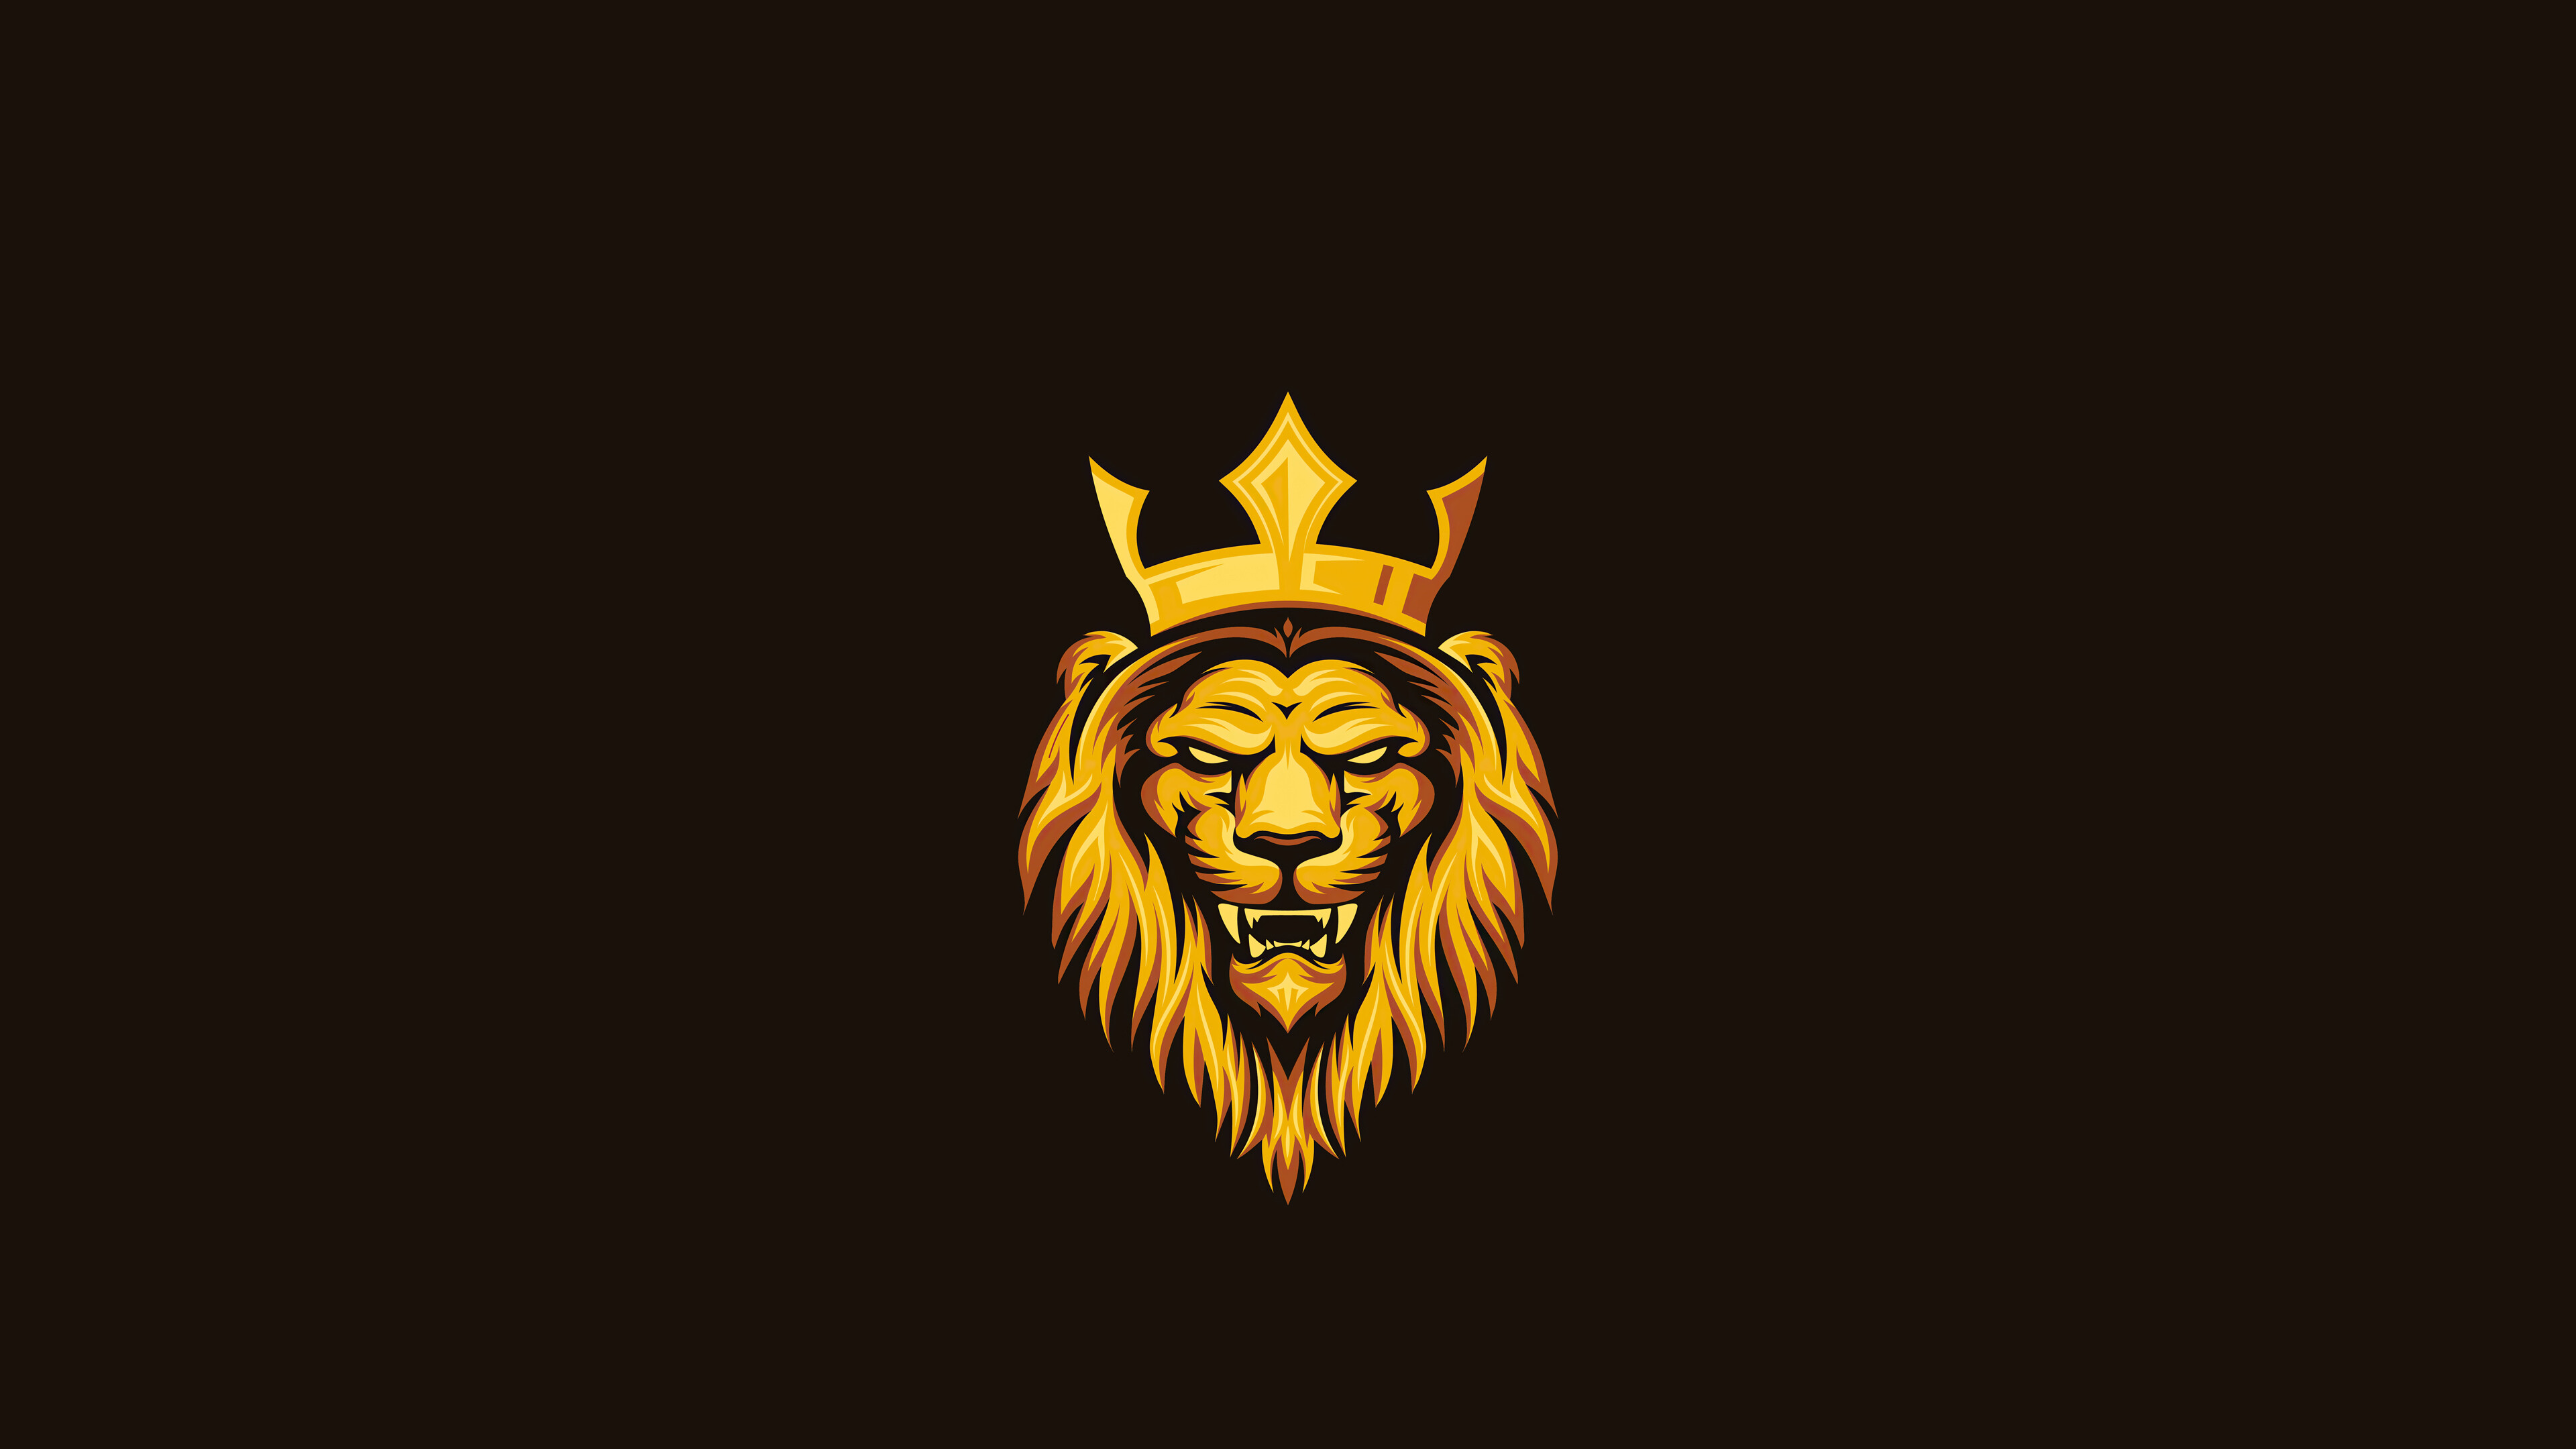 King Wallpapers (26+ images inside)